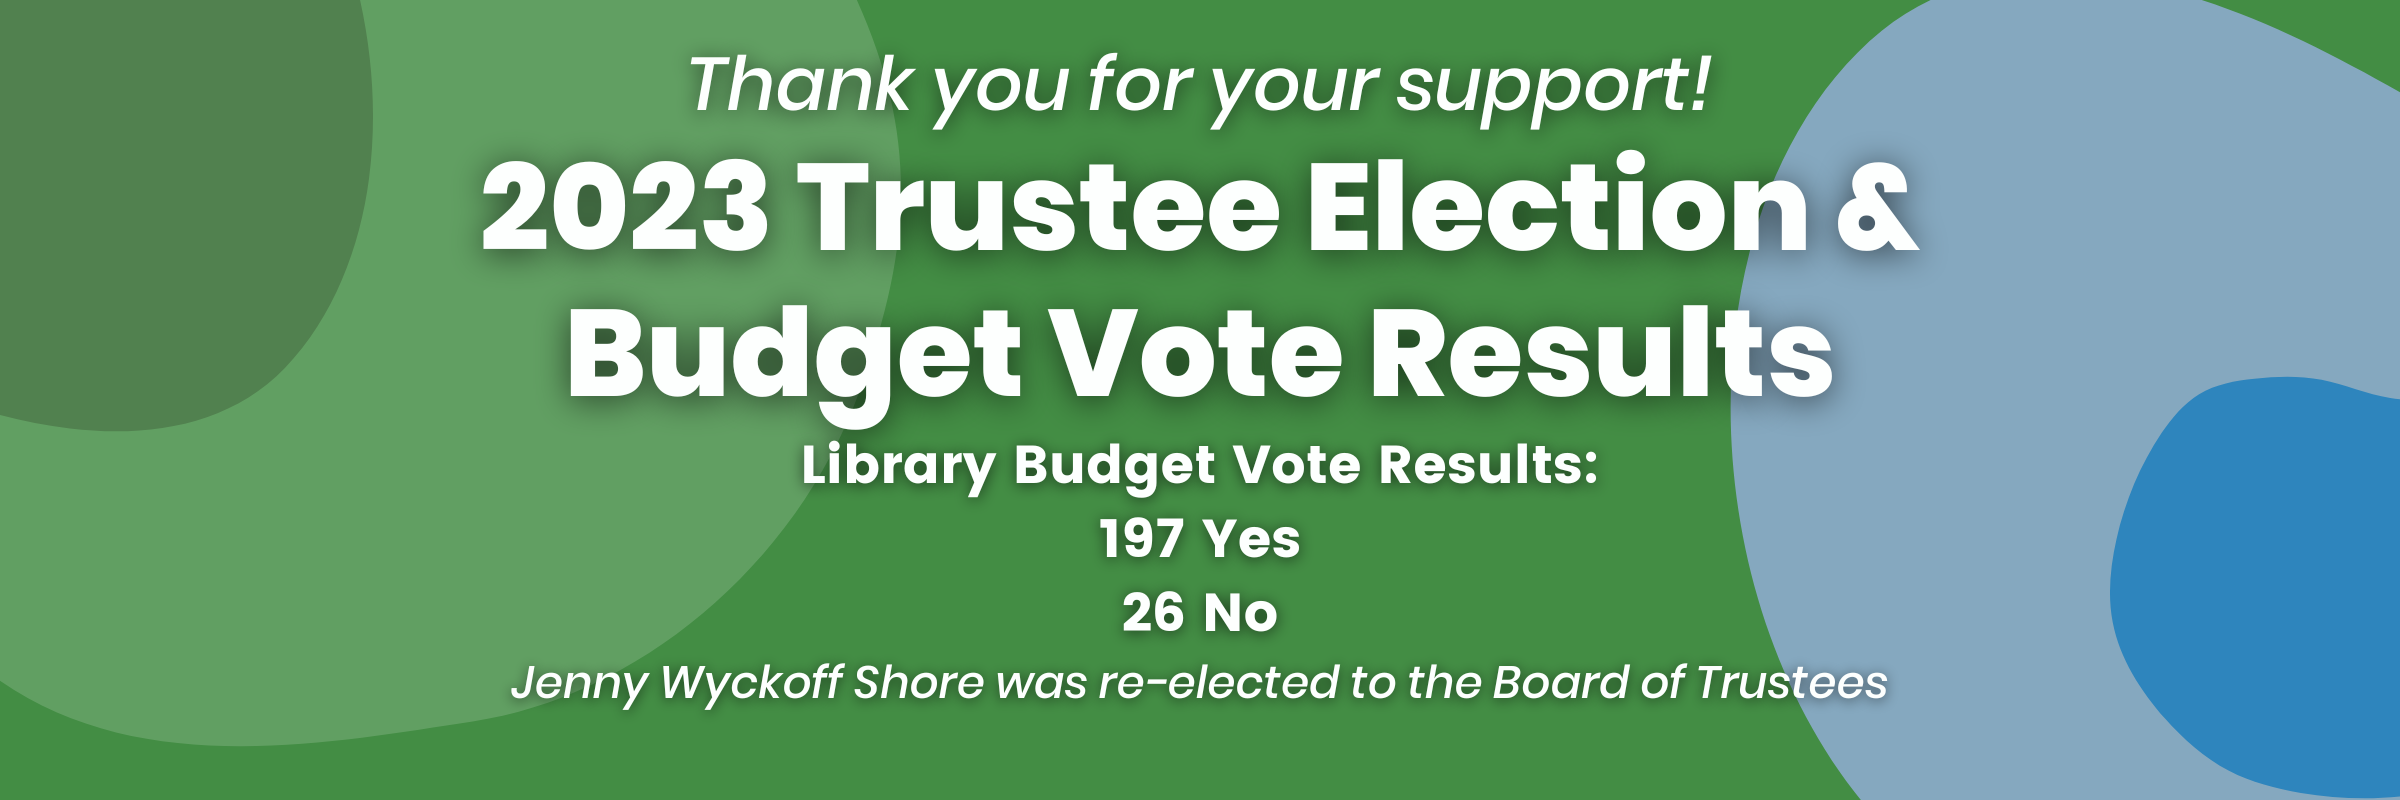 2023 Annual Meeting, Budget Vote & Trustee Election RESULTS